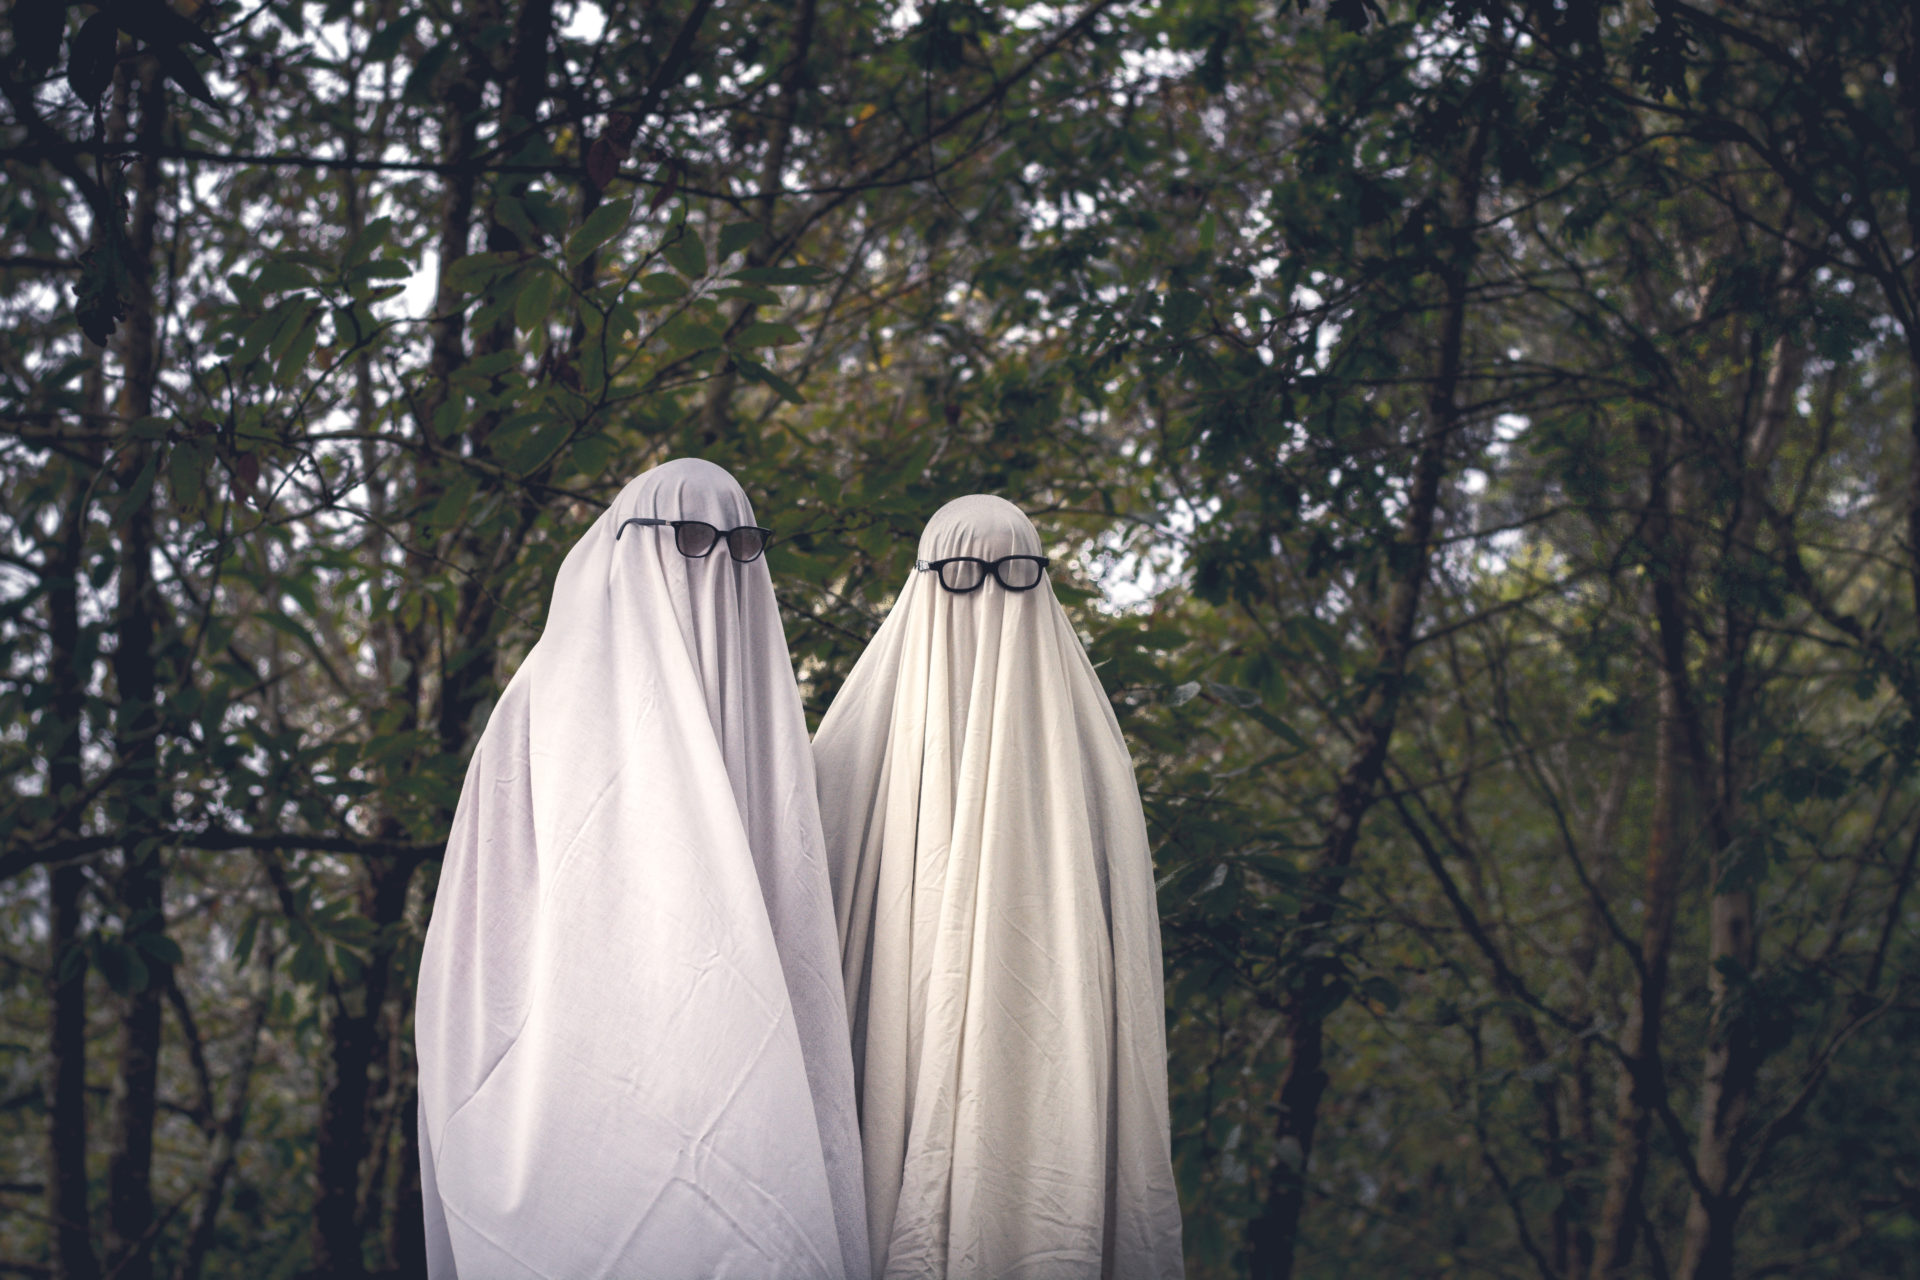 two people dressed as spooky ghosts walking outside in the forest